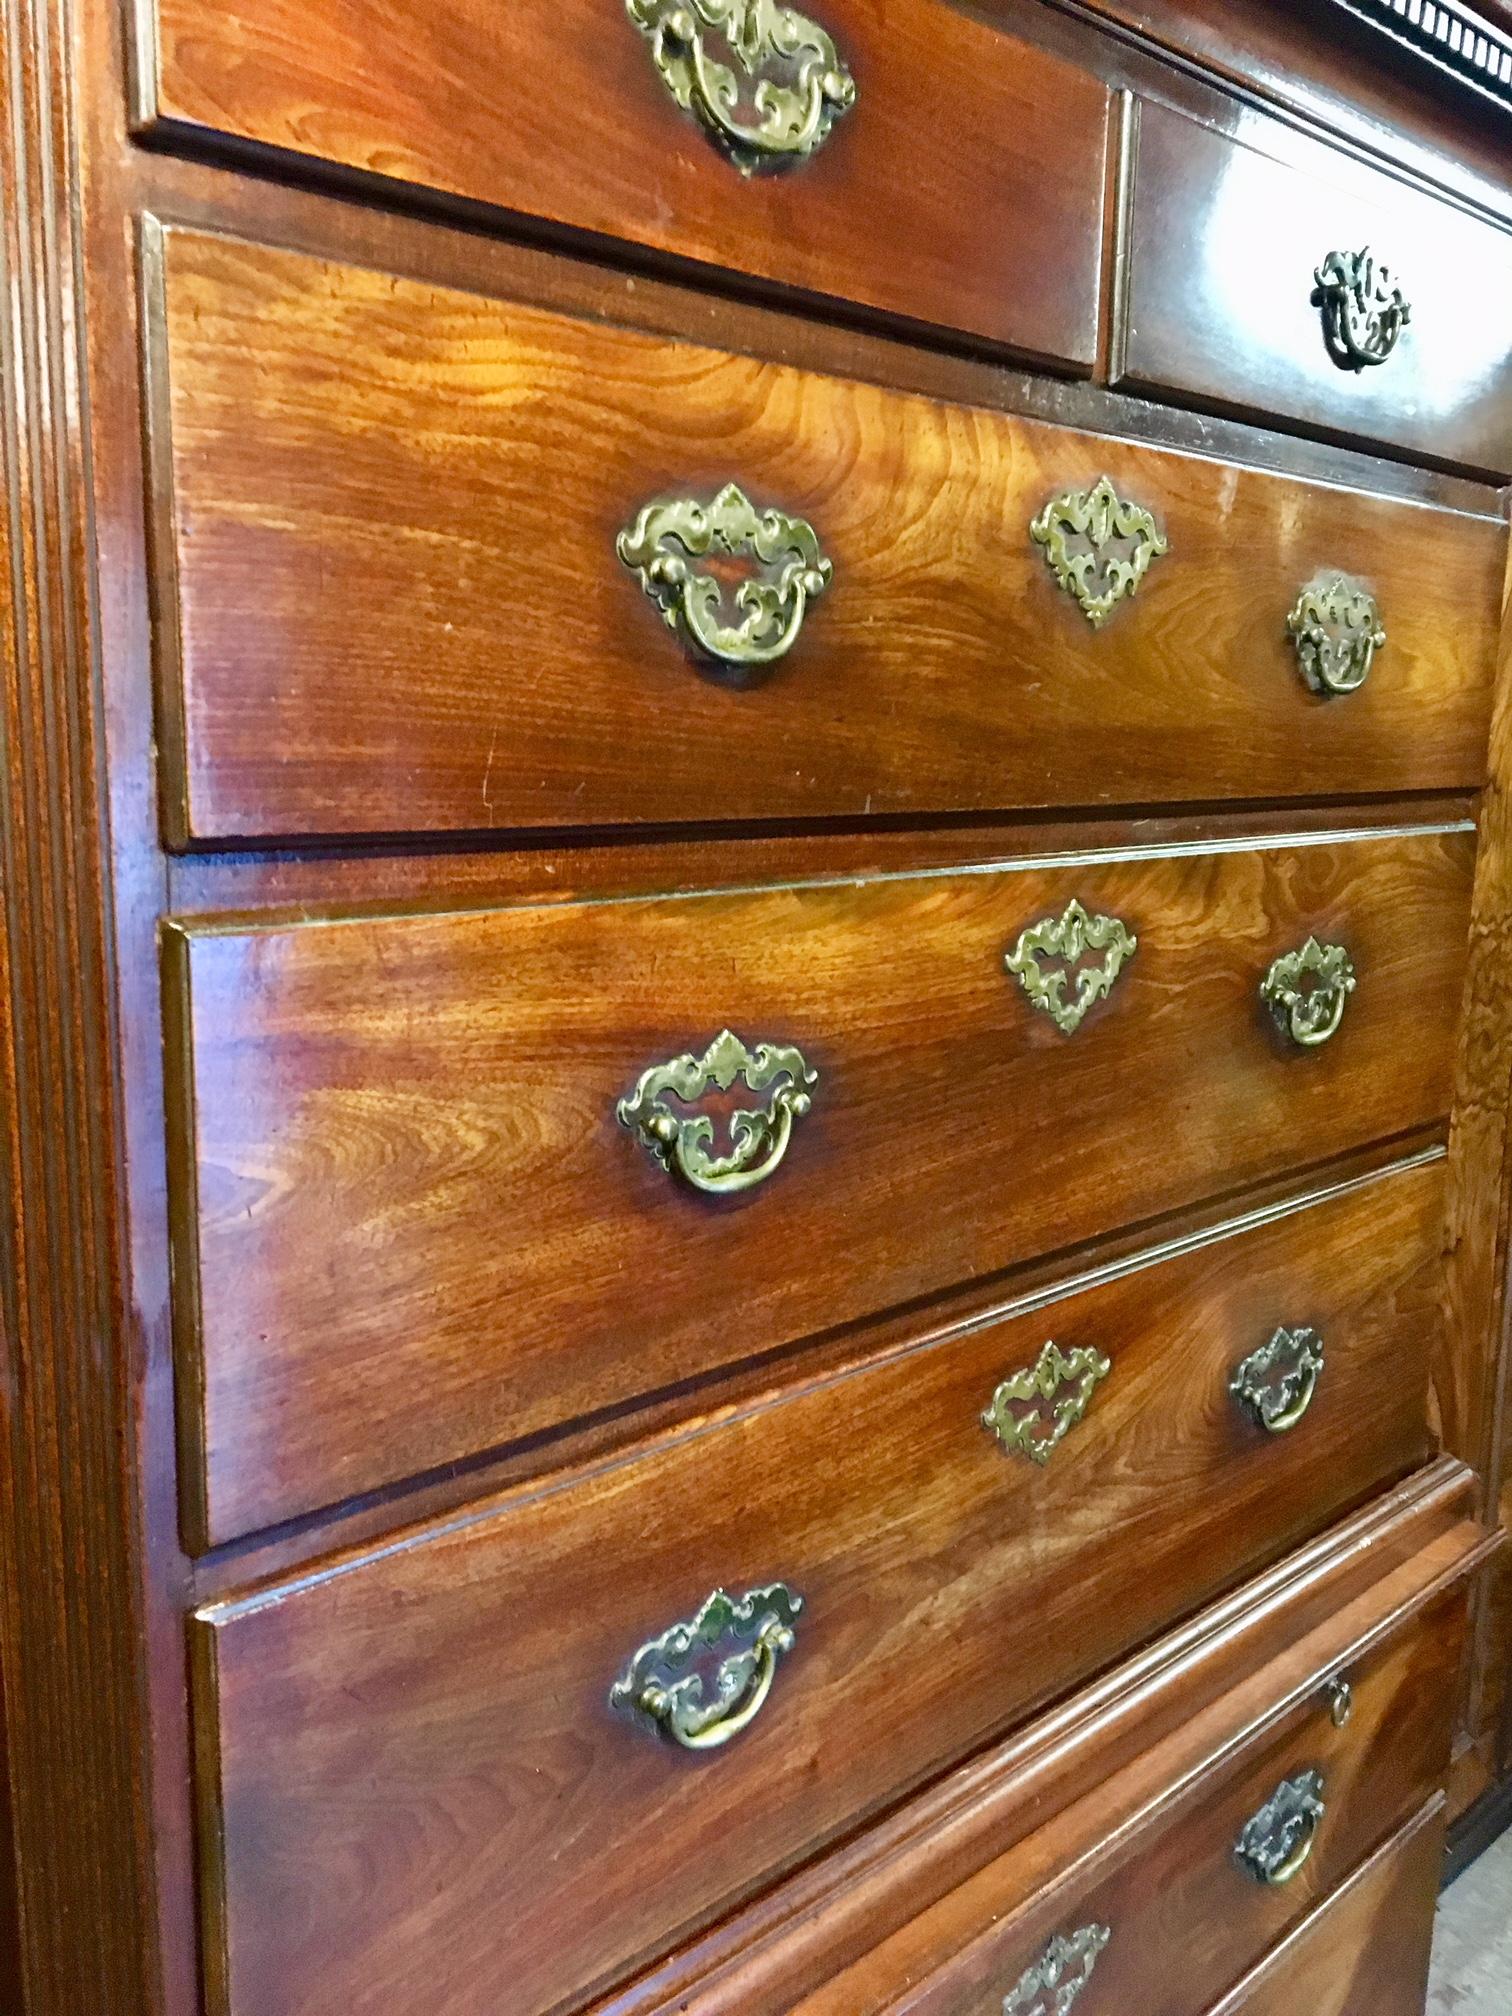 Late 18th century mahogany chest on chest with brushing slide.
This delightful chest is of a compact size, has the most glorious original antique colour and patina,
along with all its original Brass handles and escutchon plates. A super original